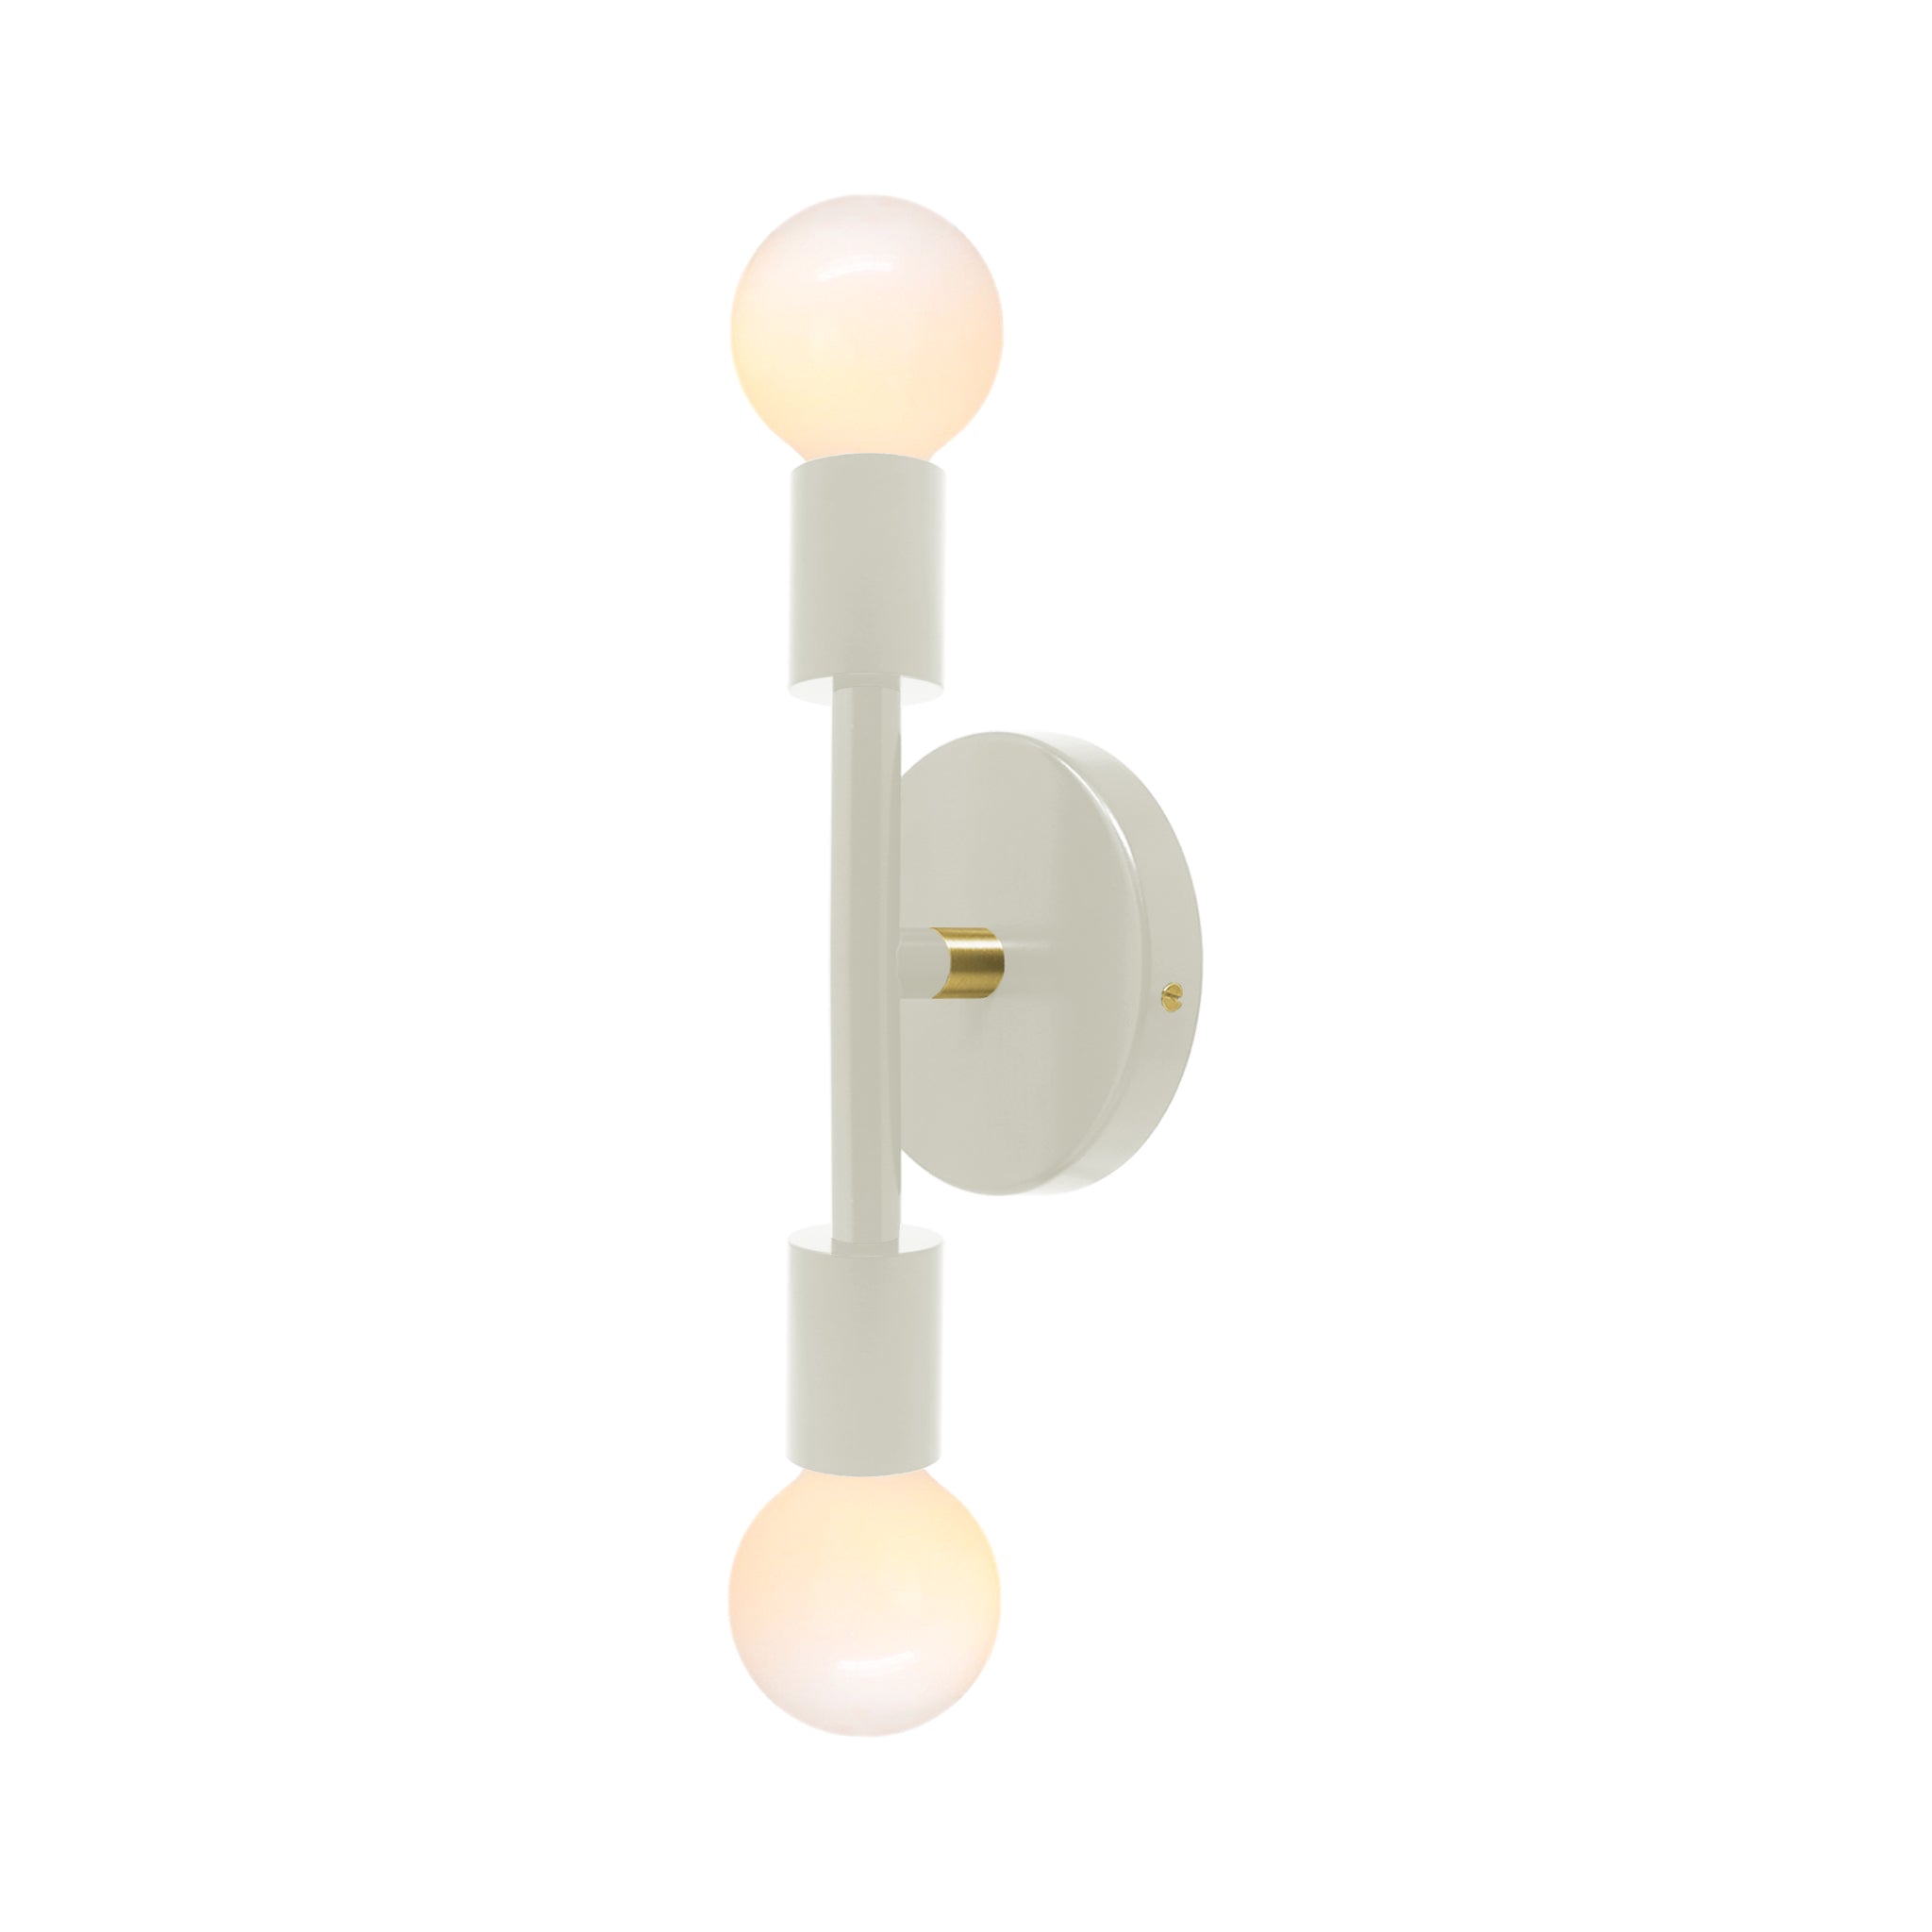 Brass and bone color Pilot sconce 11" Dutton Brown lighting